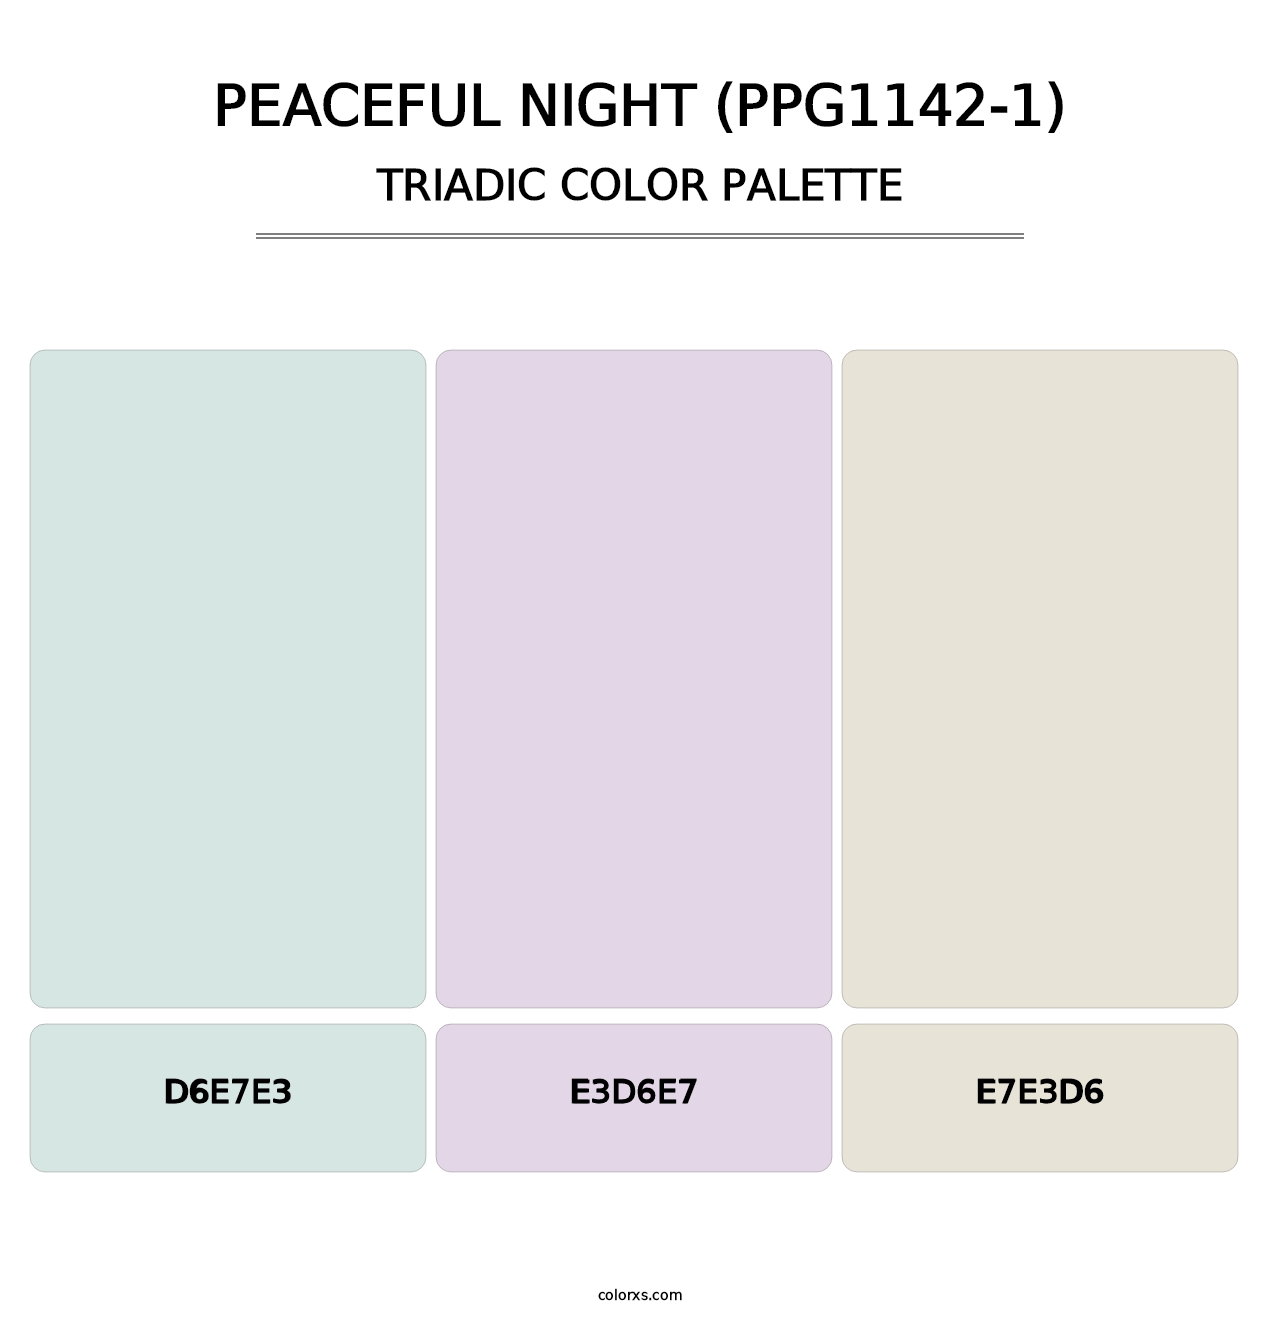 Peaceful Night (PPG1142-1) - Triadic Color Palette